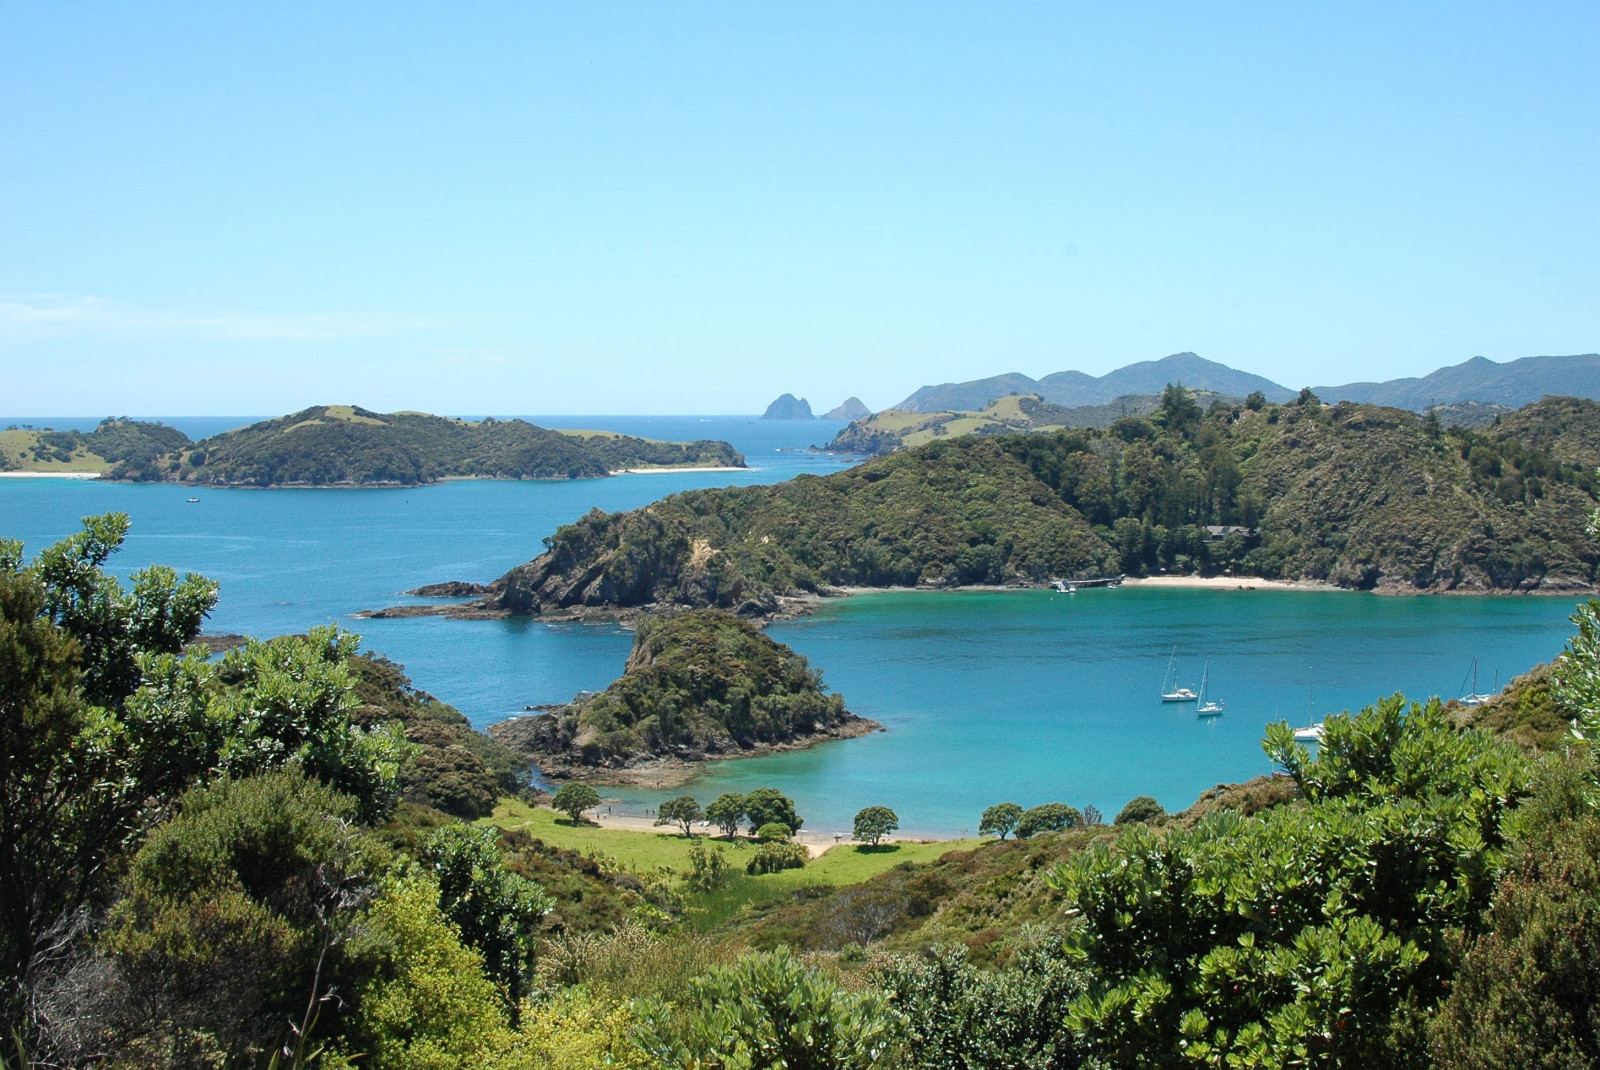 Green tree filled islands with blue waters and white boats floating at Bay of Islands outside of Auckland, New Zealand.